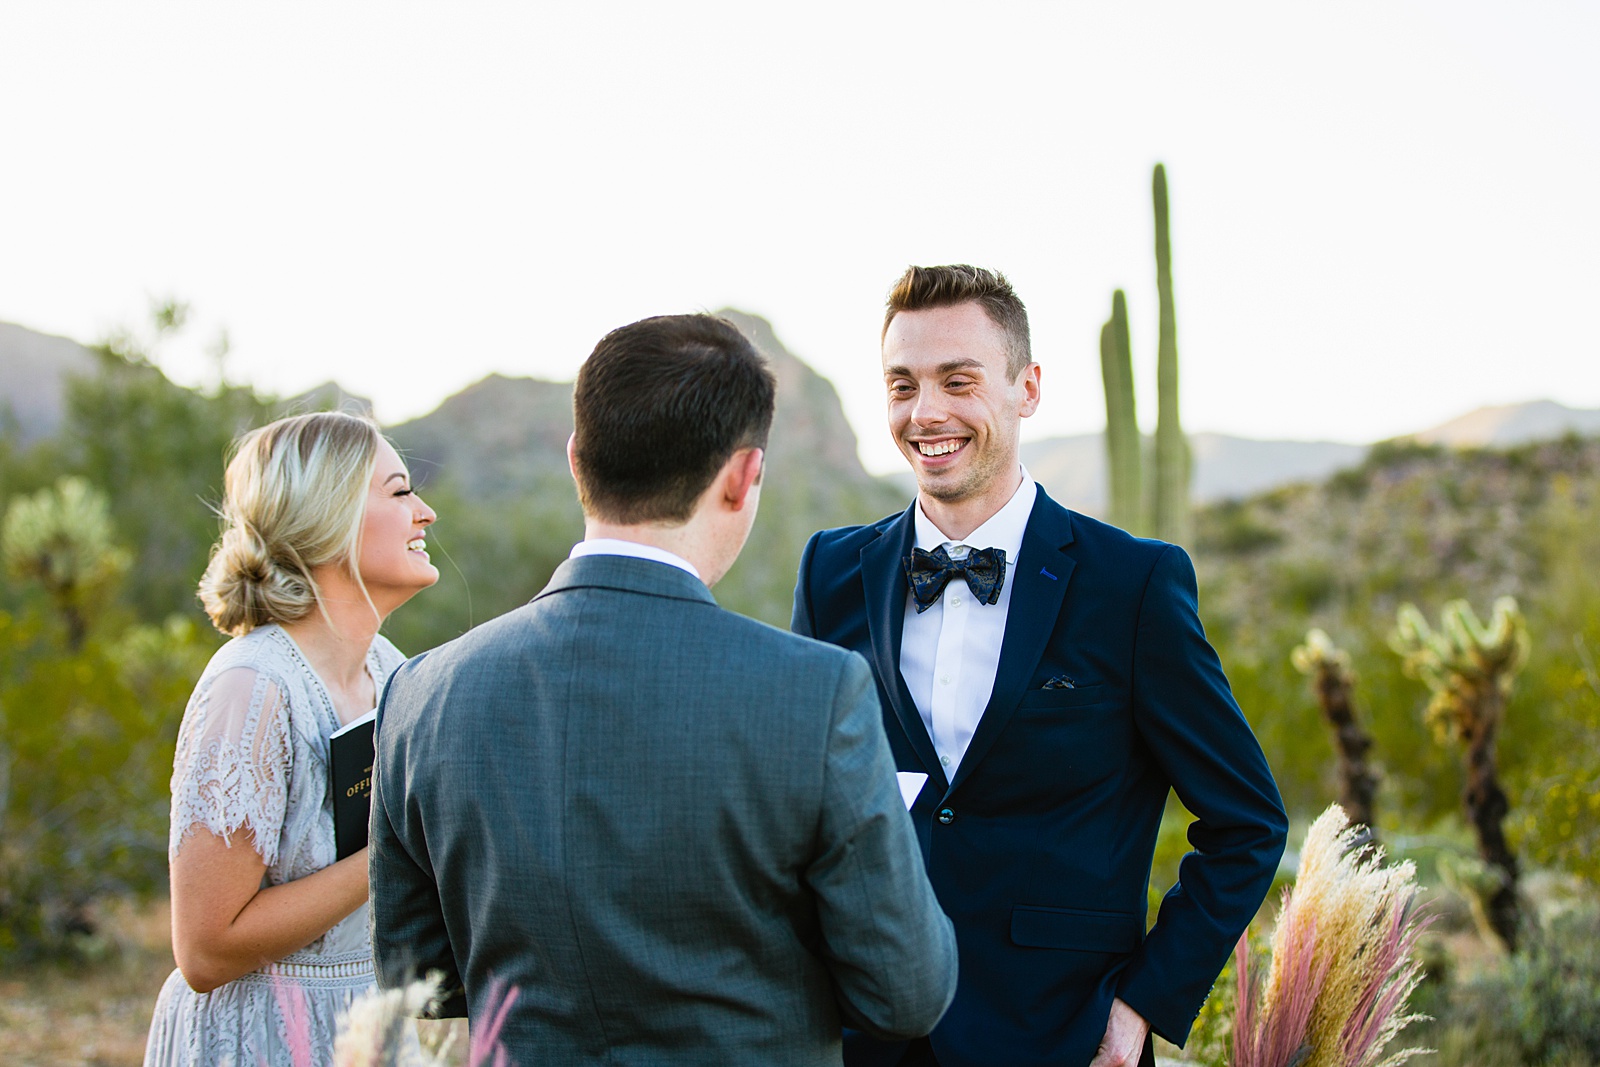 Groom looking at his groom during their wedding ceremony at White Tanks by Phoenix elopement photographer PMA Photography.